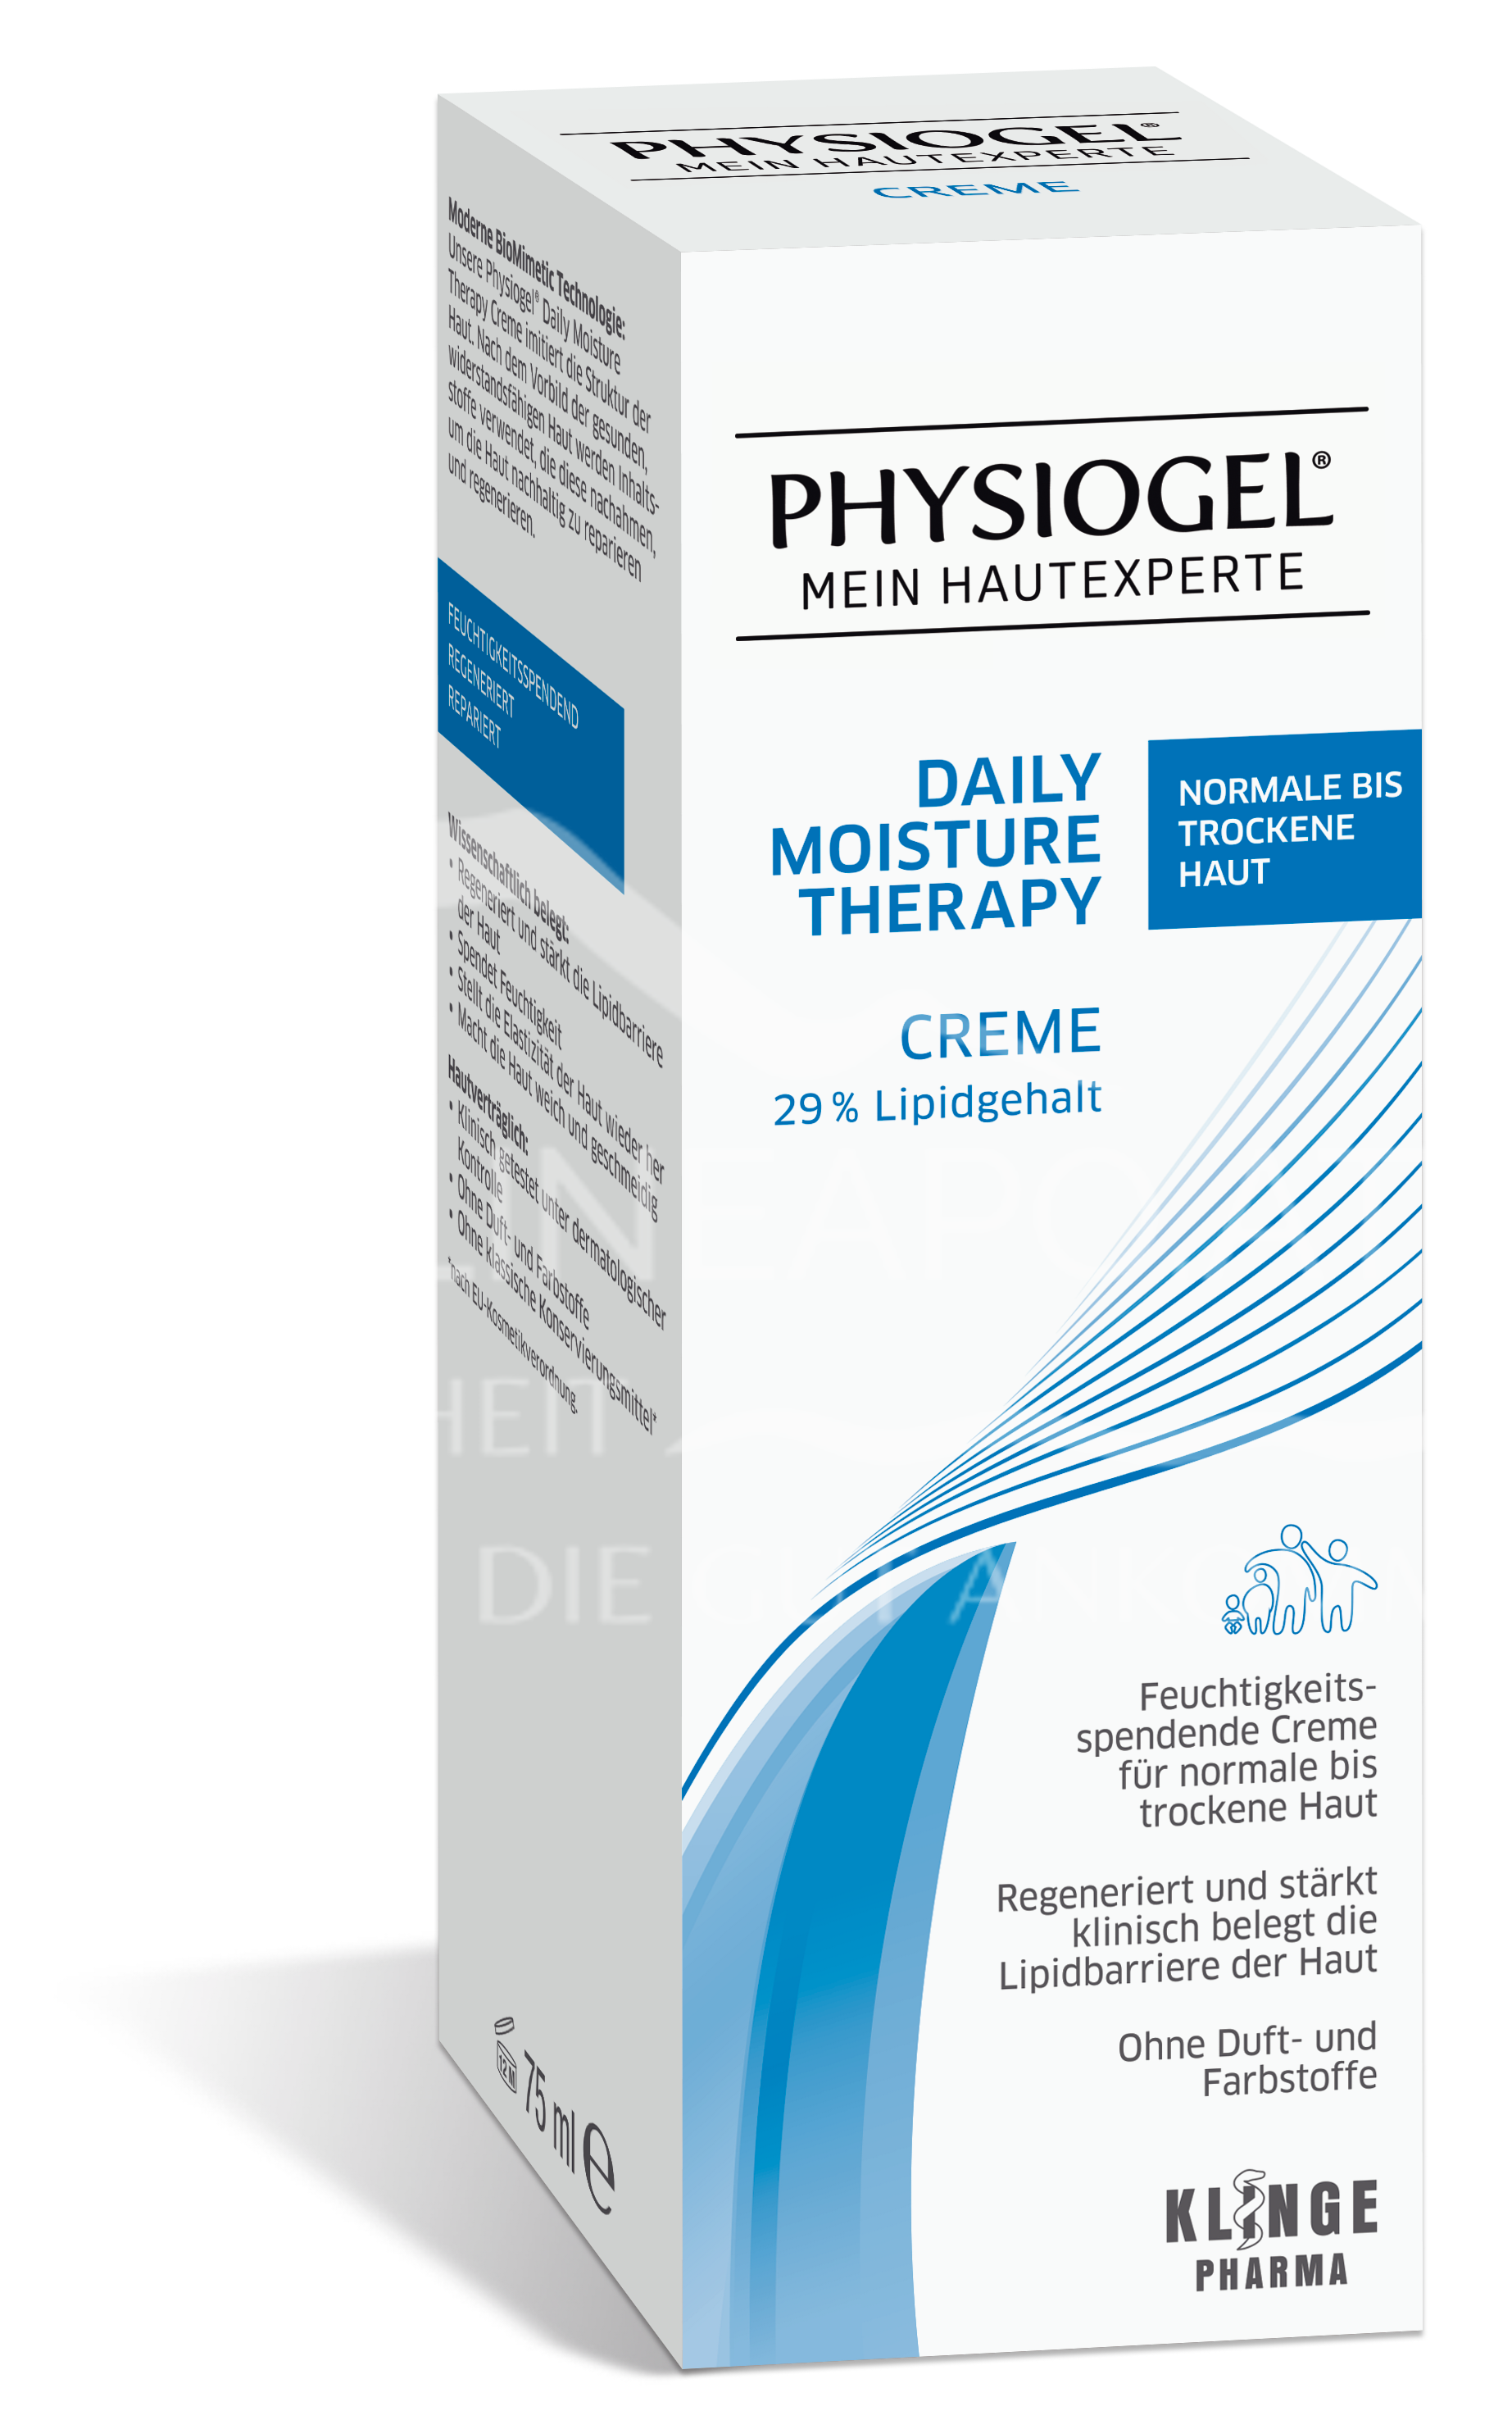 Physiogel® Daily Moisture Therapy Creme - Normale bis trockene Haut